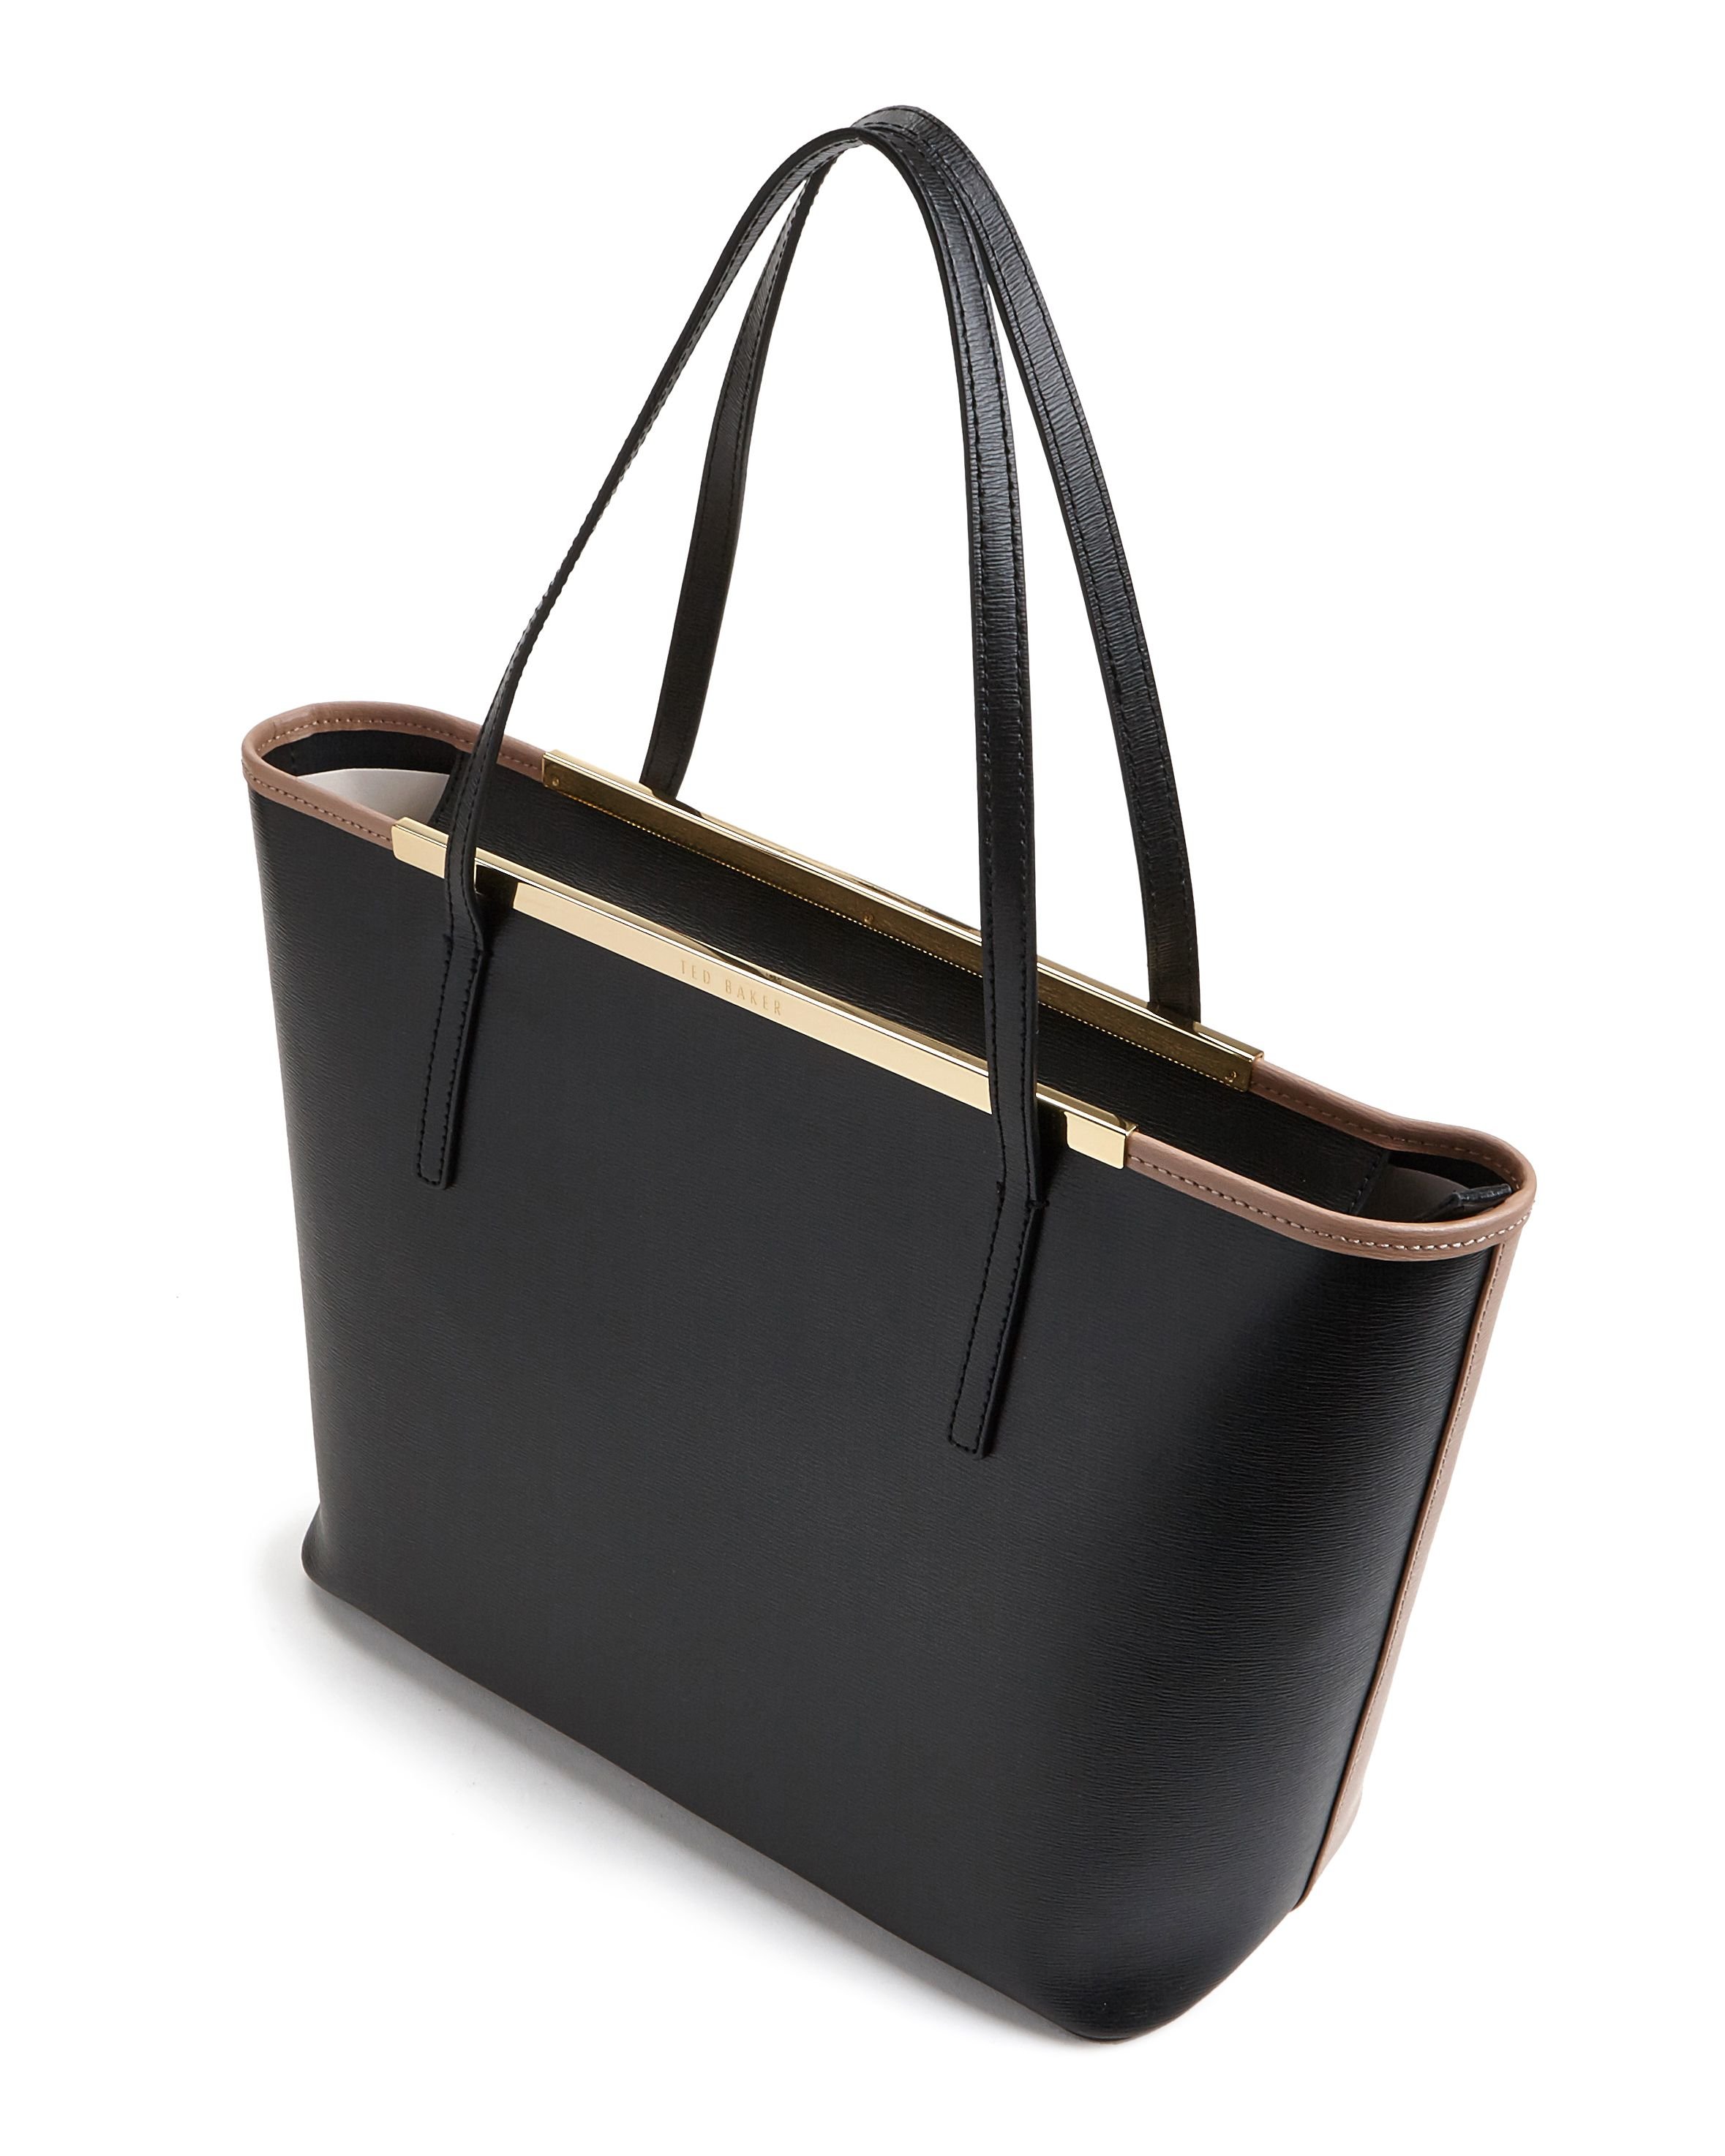 Ted Baker Nicola Colour Block Leather Shopper Bag in Brown - Lyst